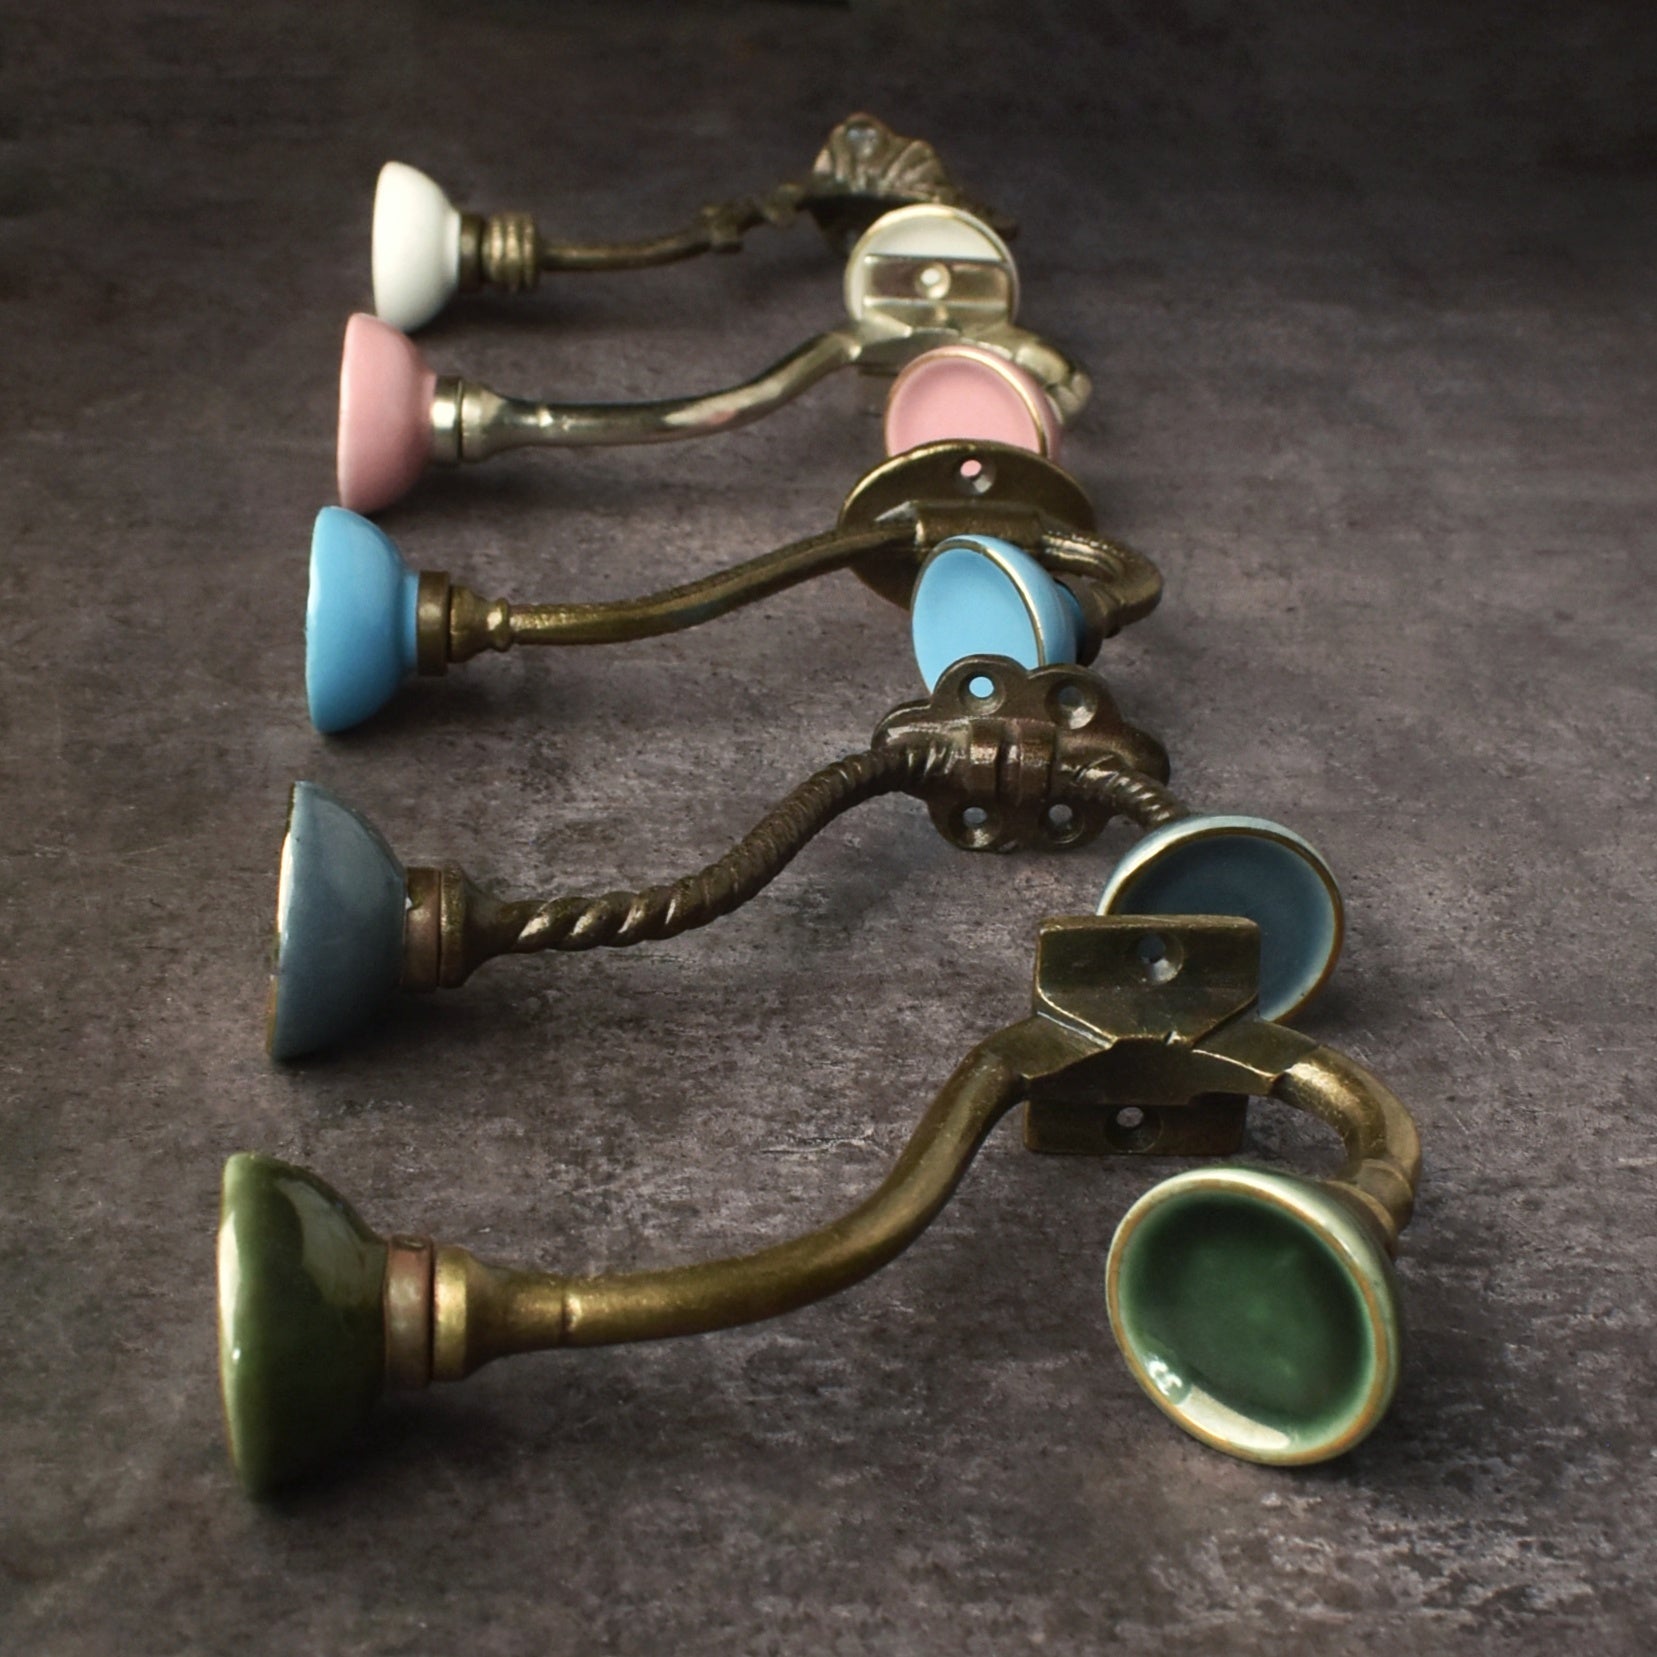 Confluence Ceramic Knob Coat and Wall Hooks and Hangers